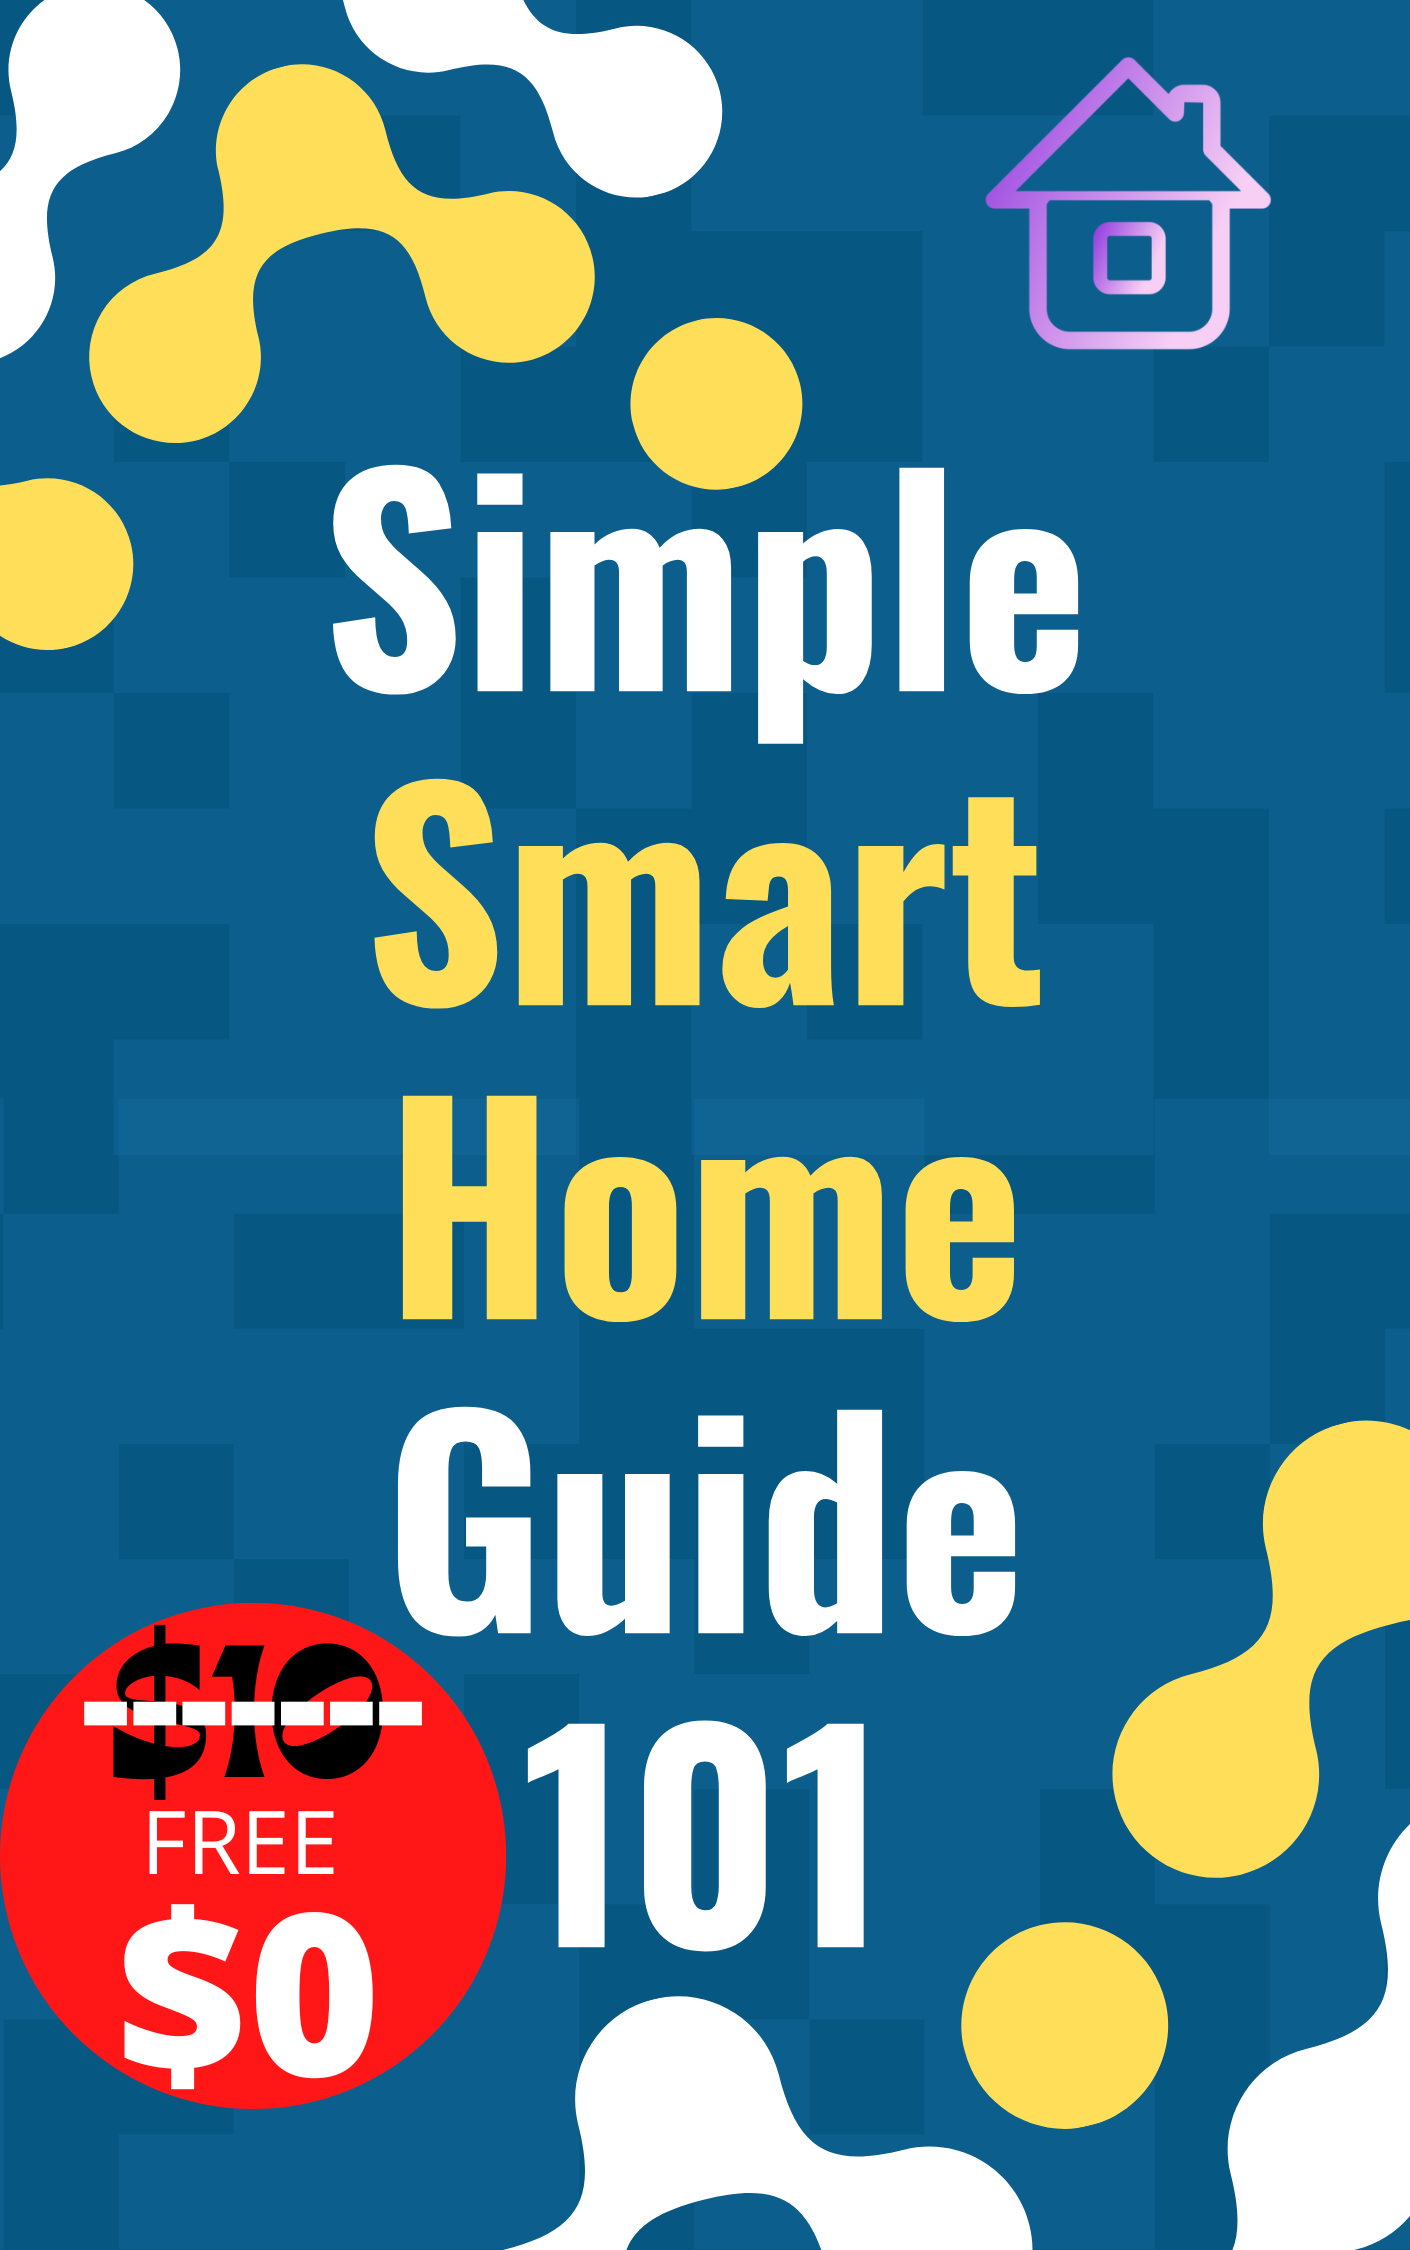 Simple Smart Home Guide 101